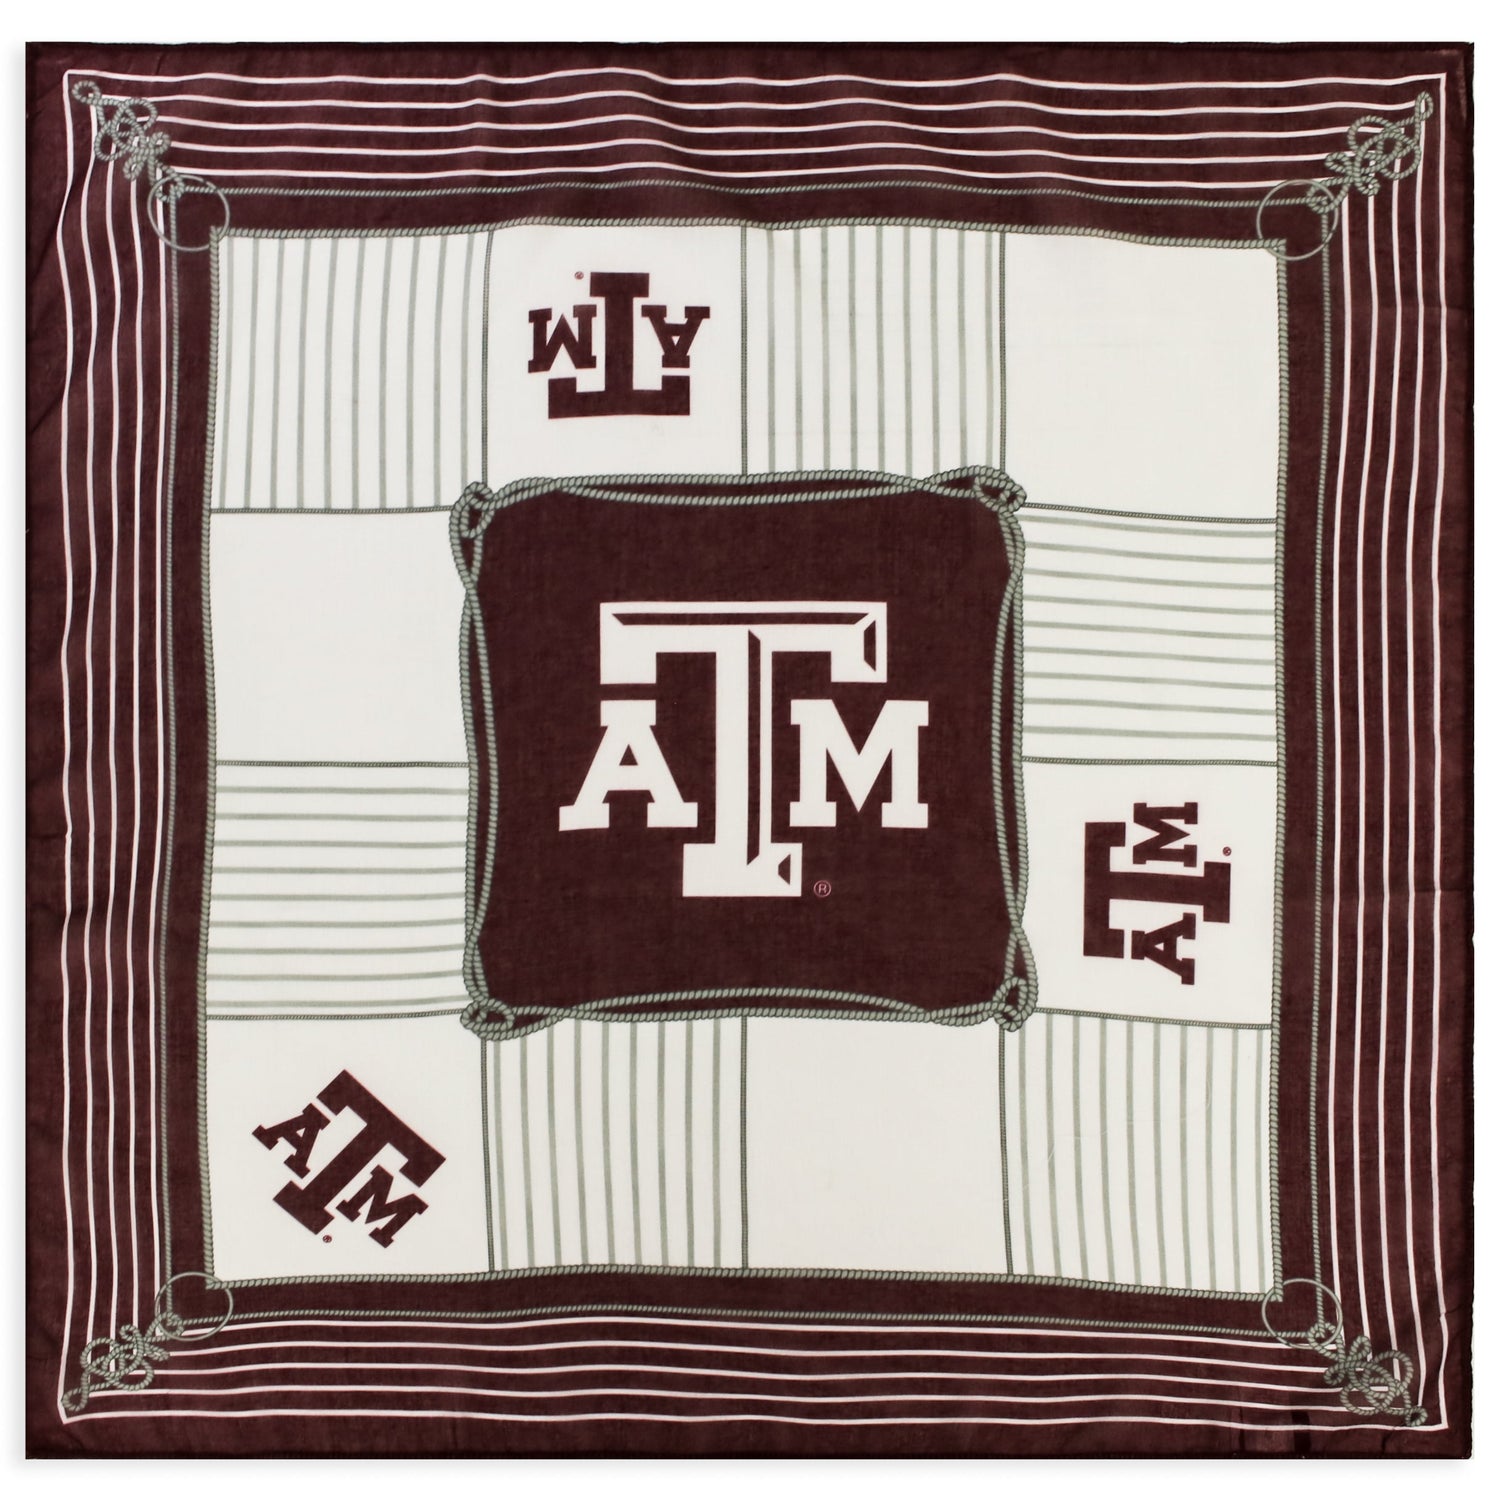 Texas A&M Square Bailey Sheer Scarf